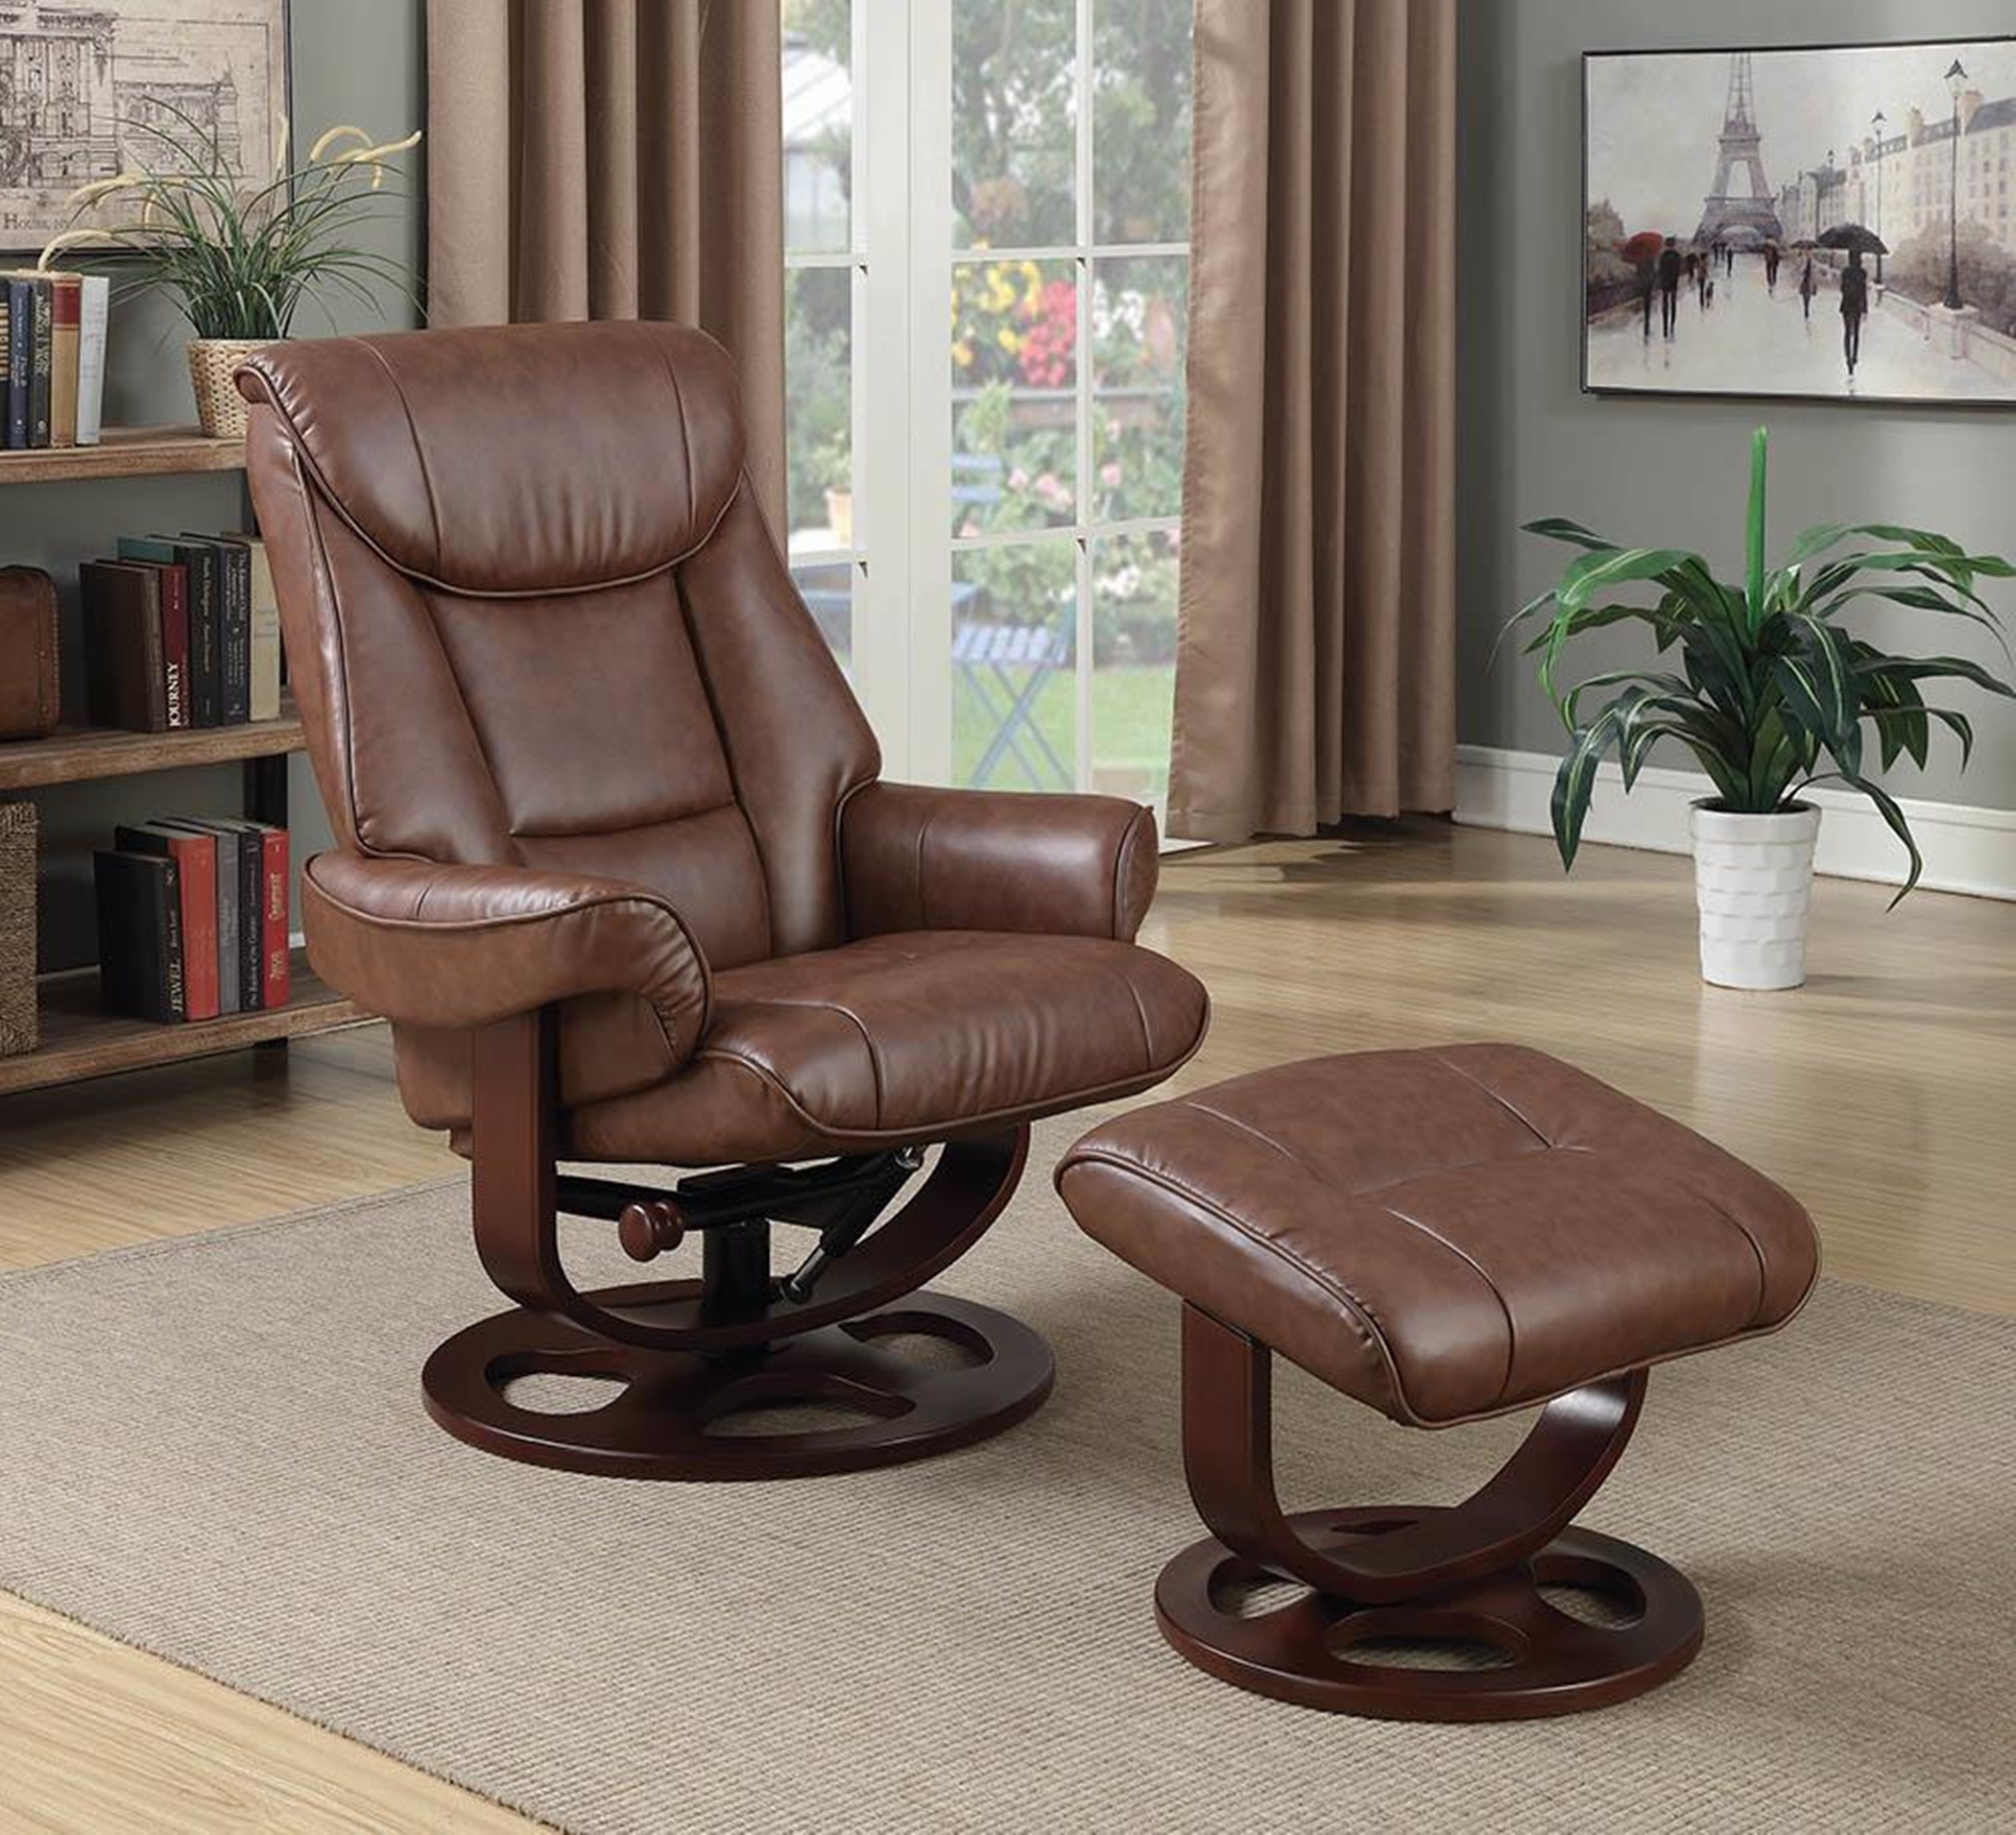 Transitional Chestnut Chair with Ottoman